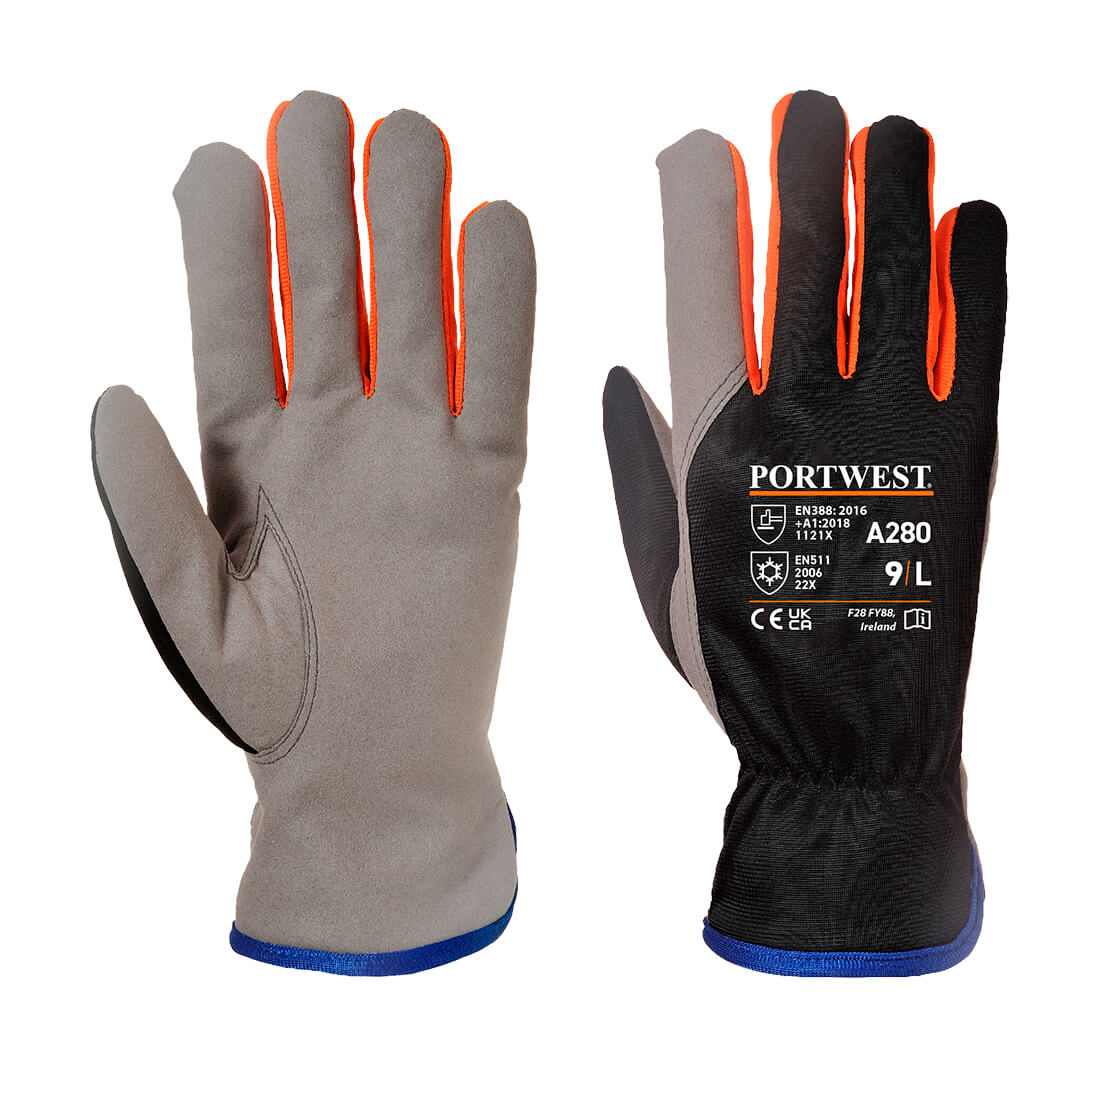 Wintershield Glove - Fully Coated Leather Polyester Lined